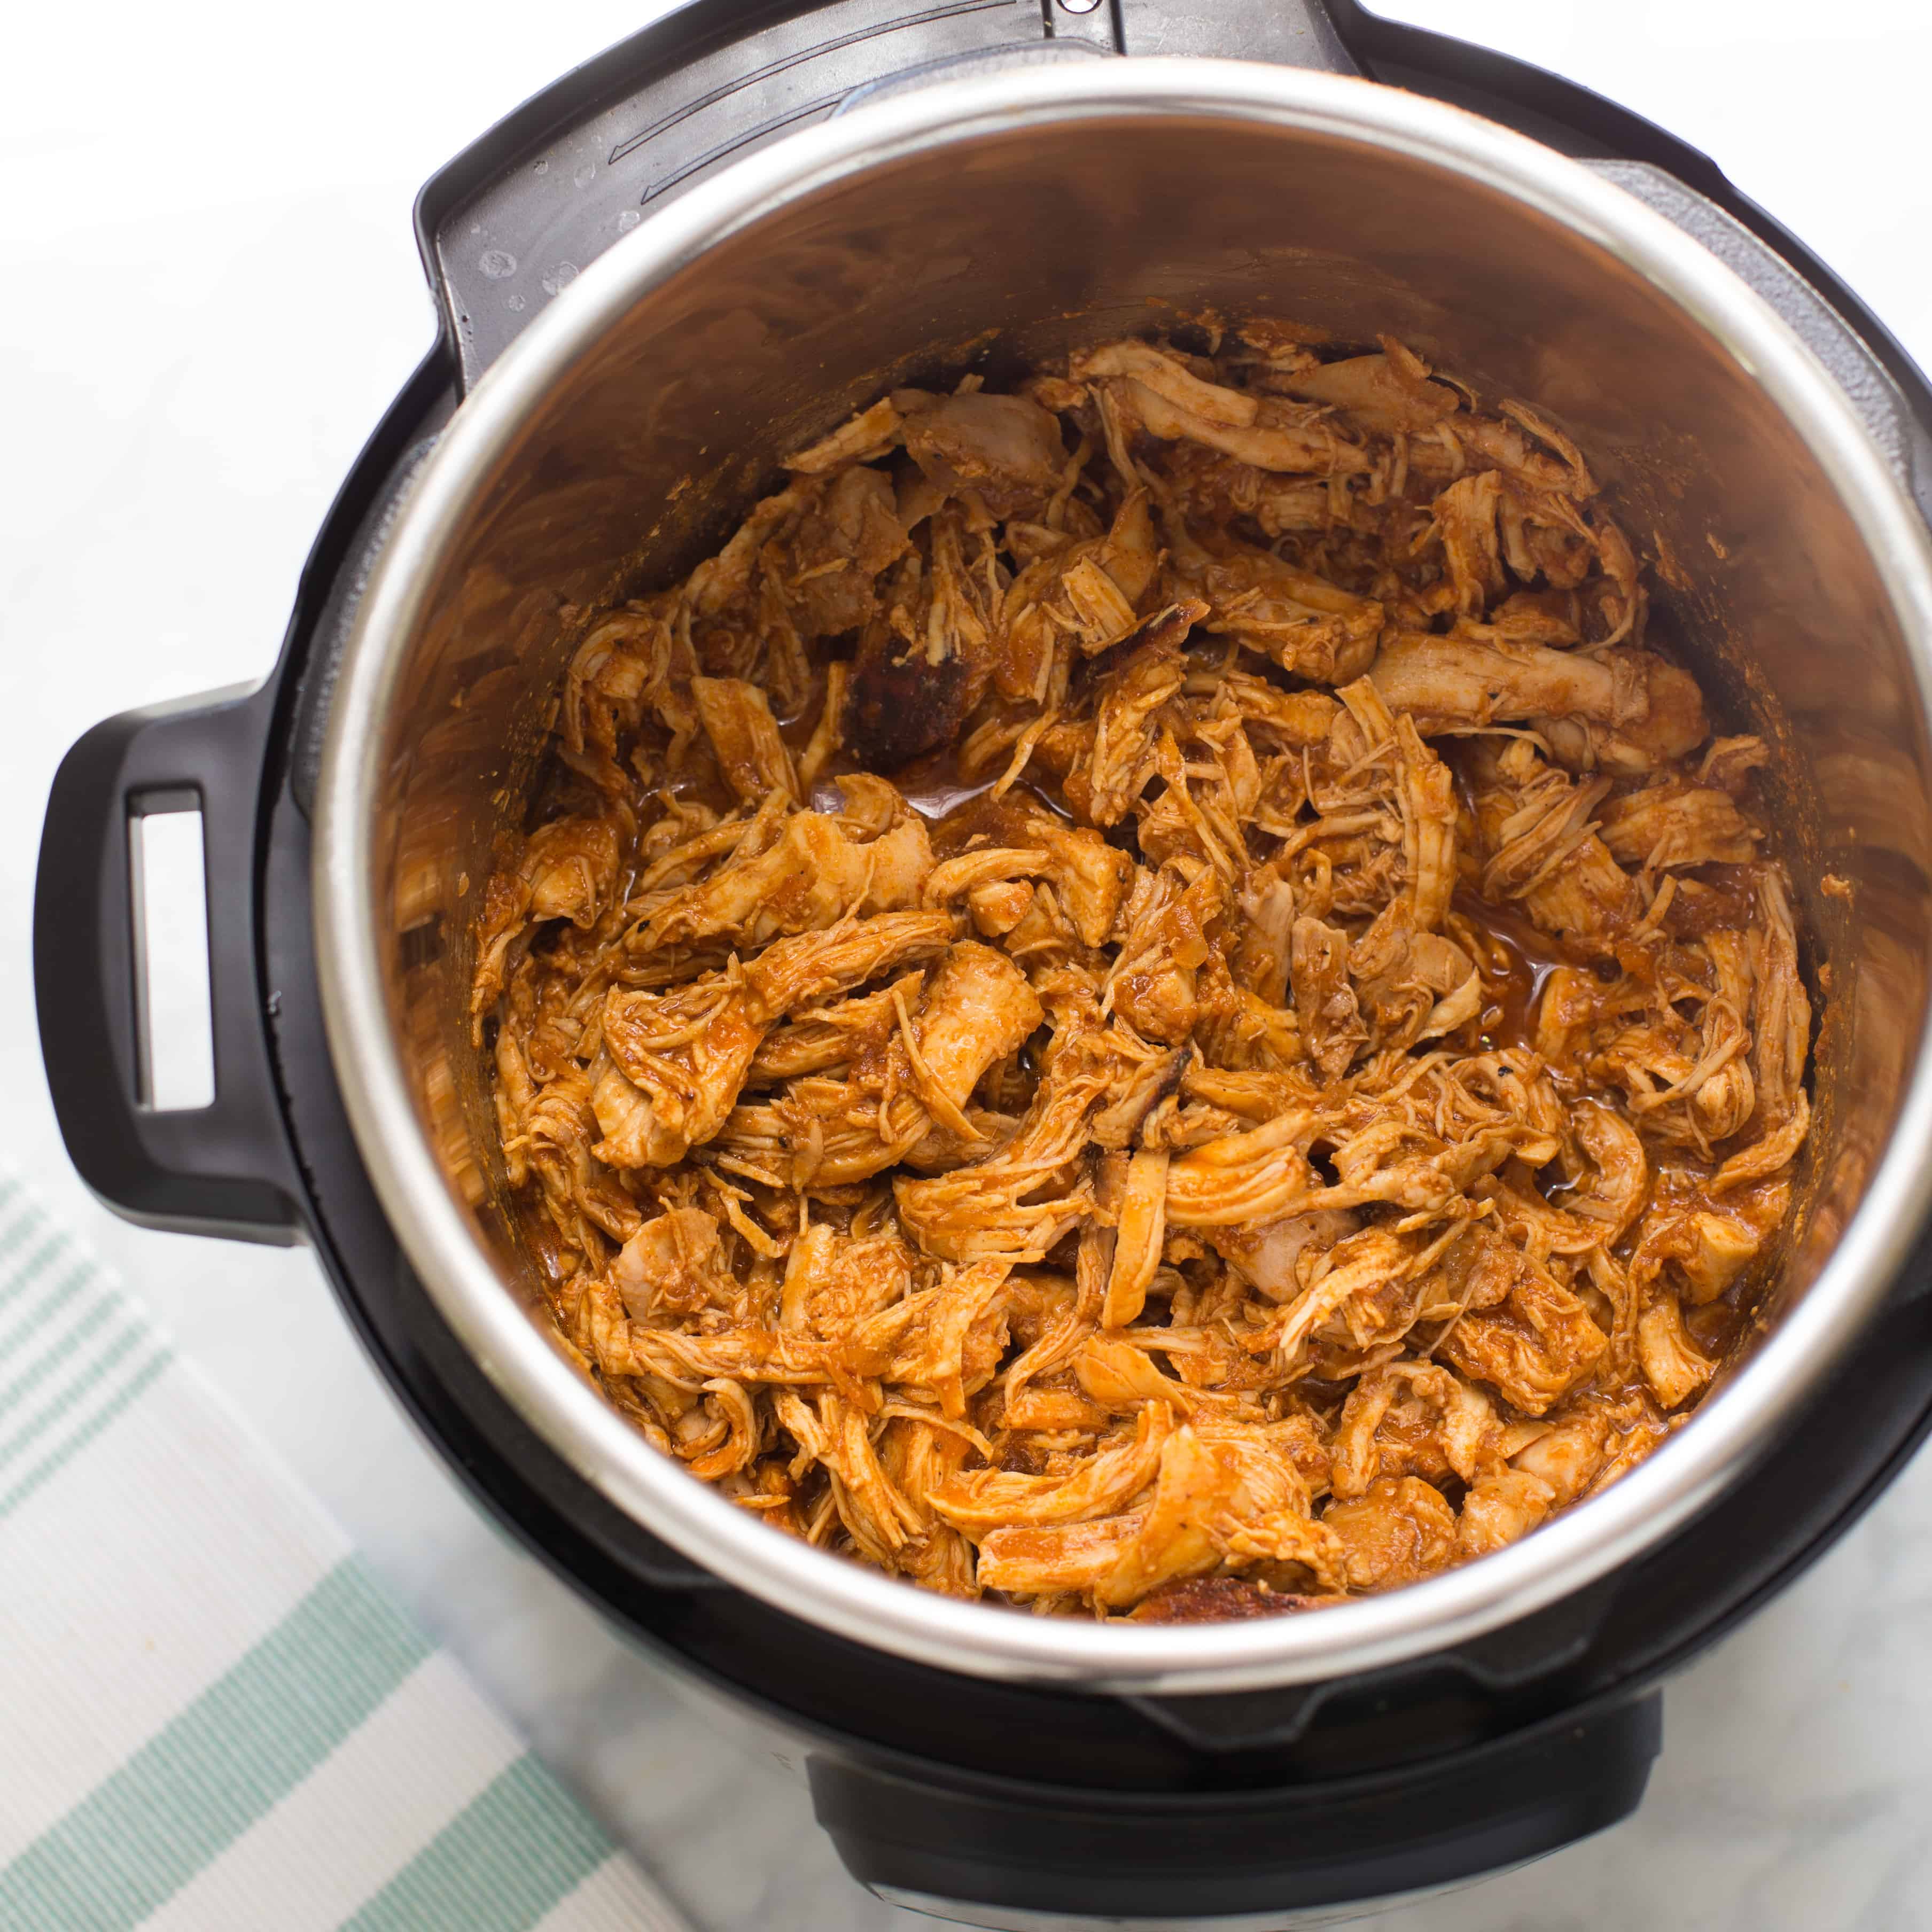 Instant Pot Bbq Chicken Meaningful Eats,Smoked Sausage Recipes With Pasta